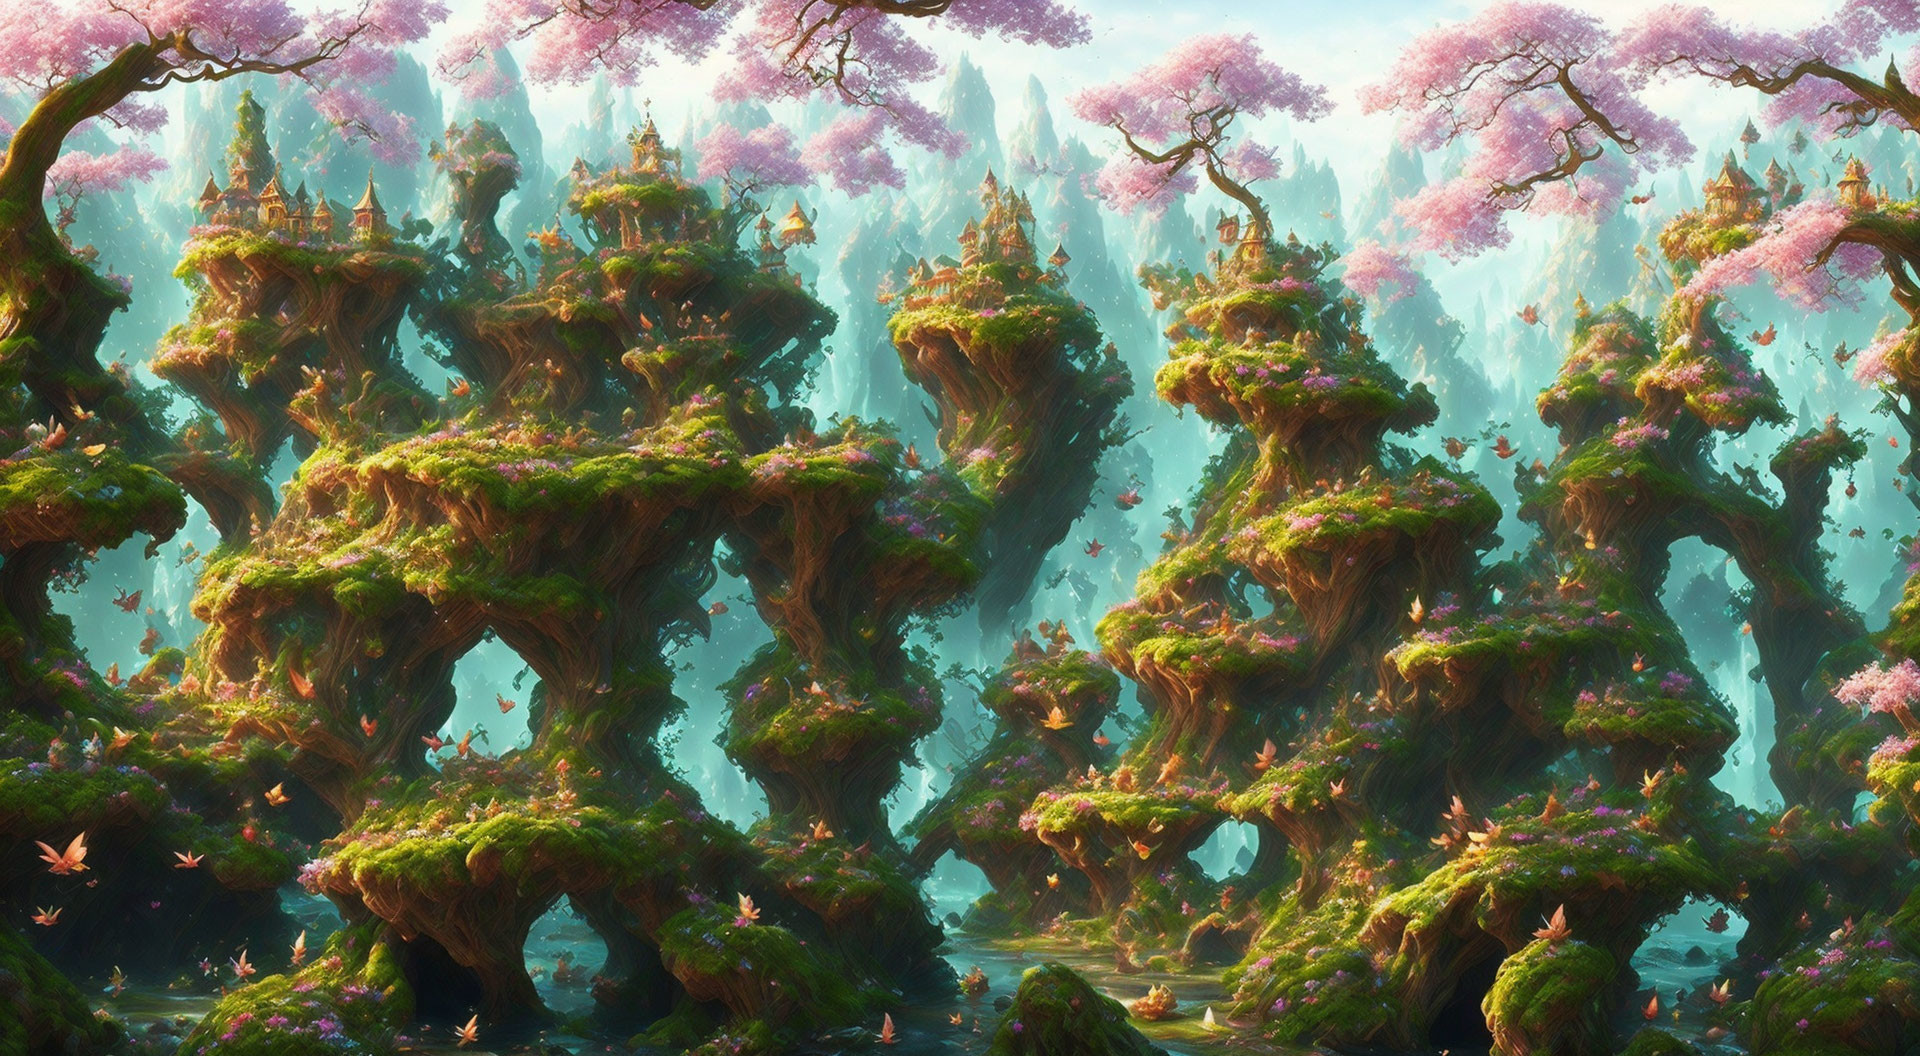 Mossy Rock Formations and Pink Flowering Trees in Fantasy Landscape